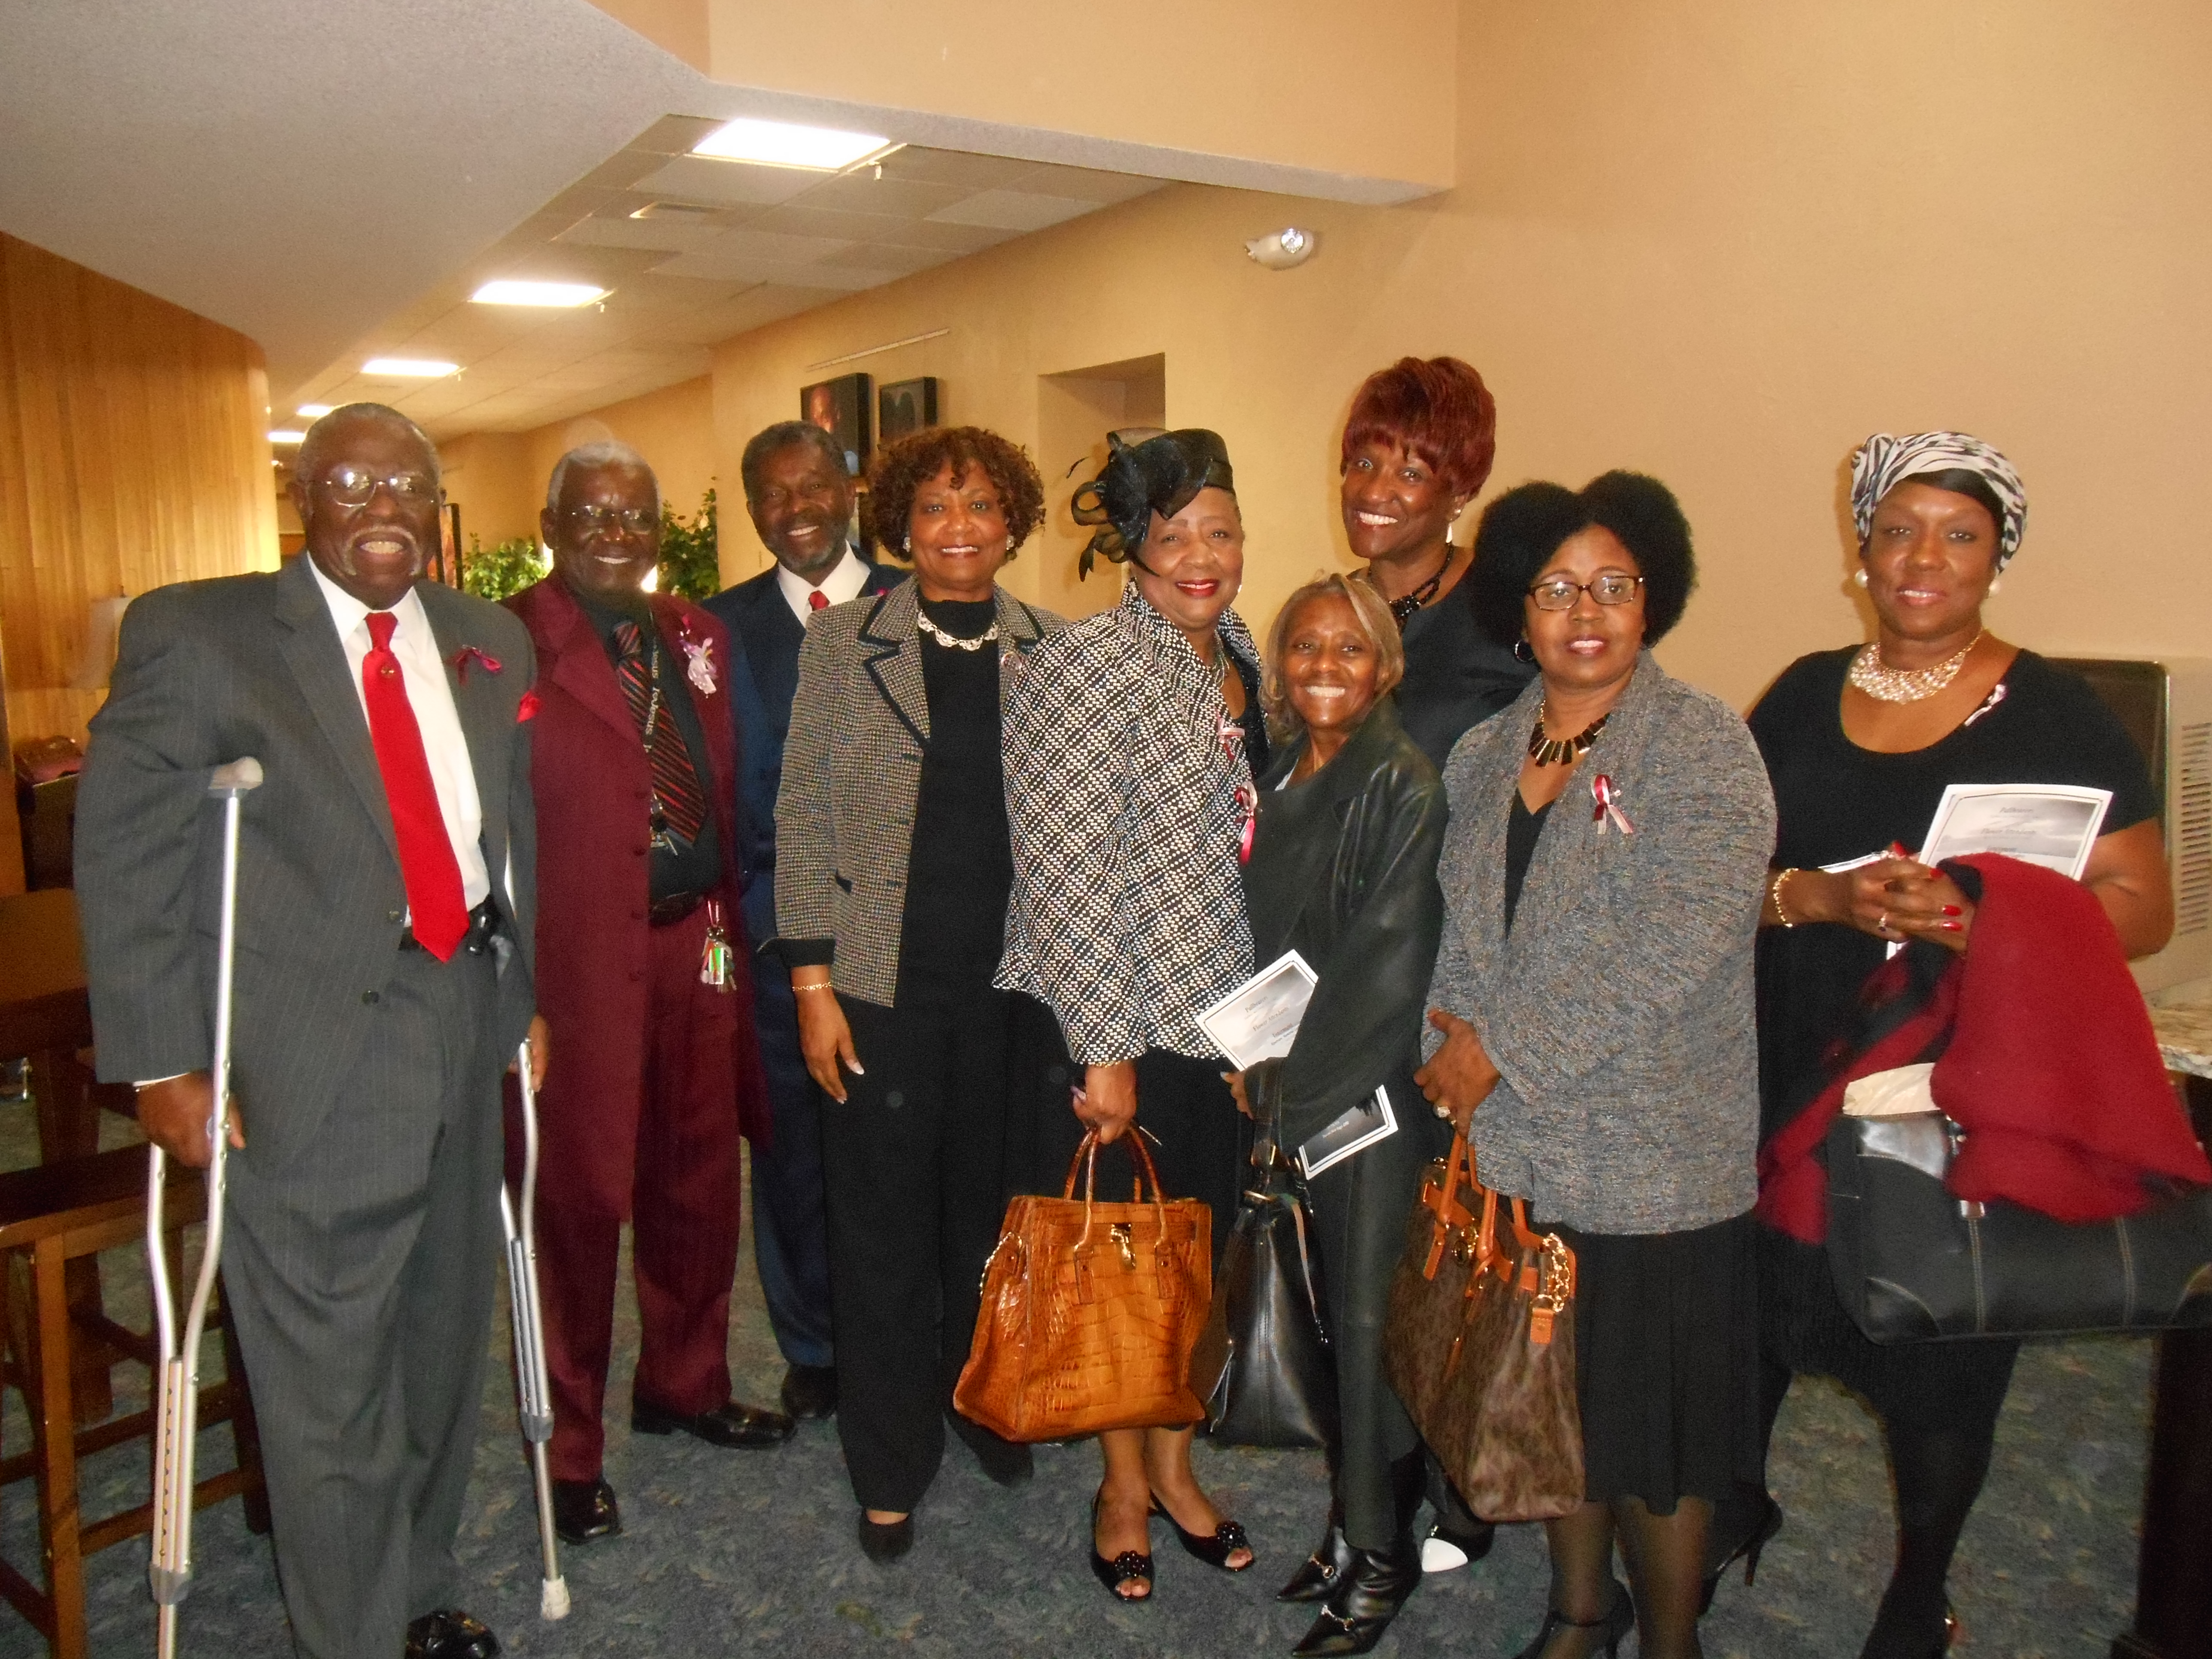 Monroe High Class 1967 at Willie Bell's Services January 10, 2015